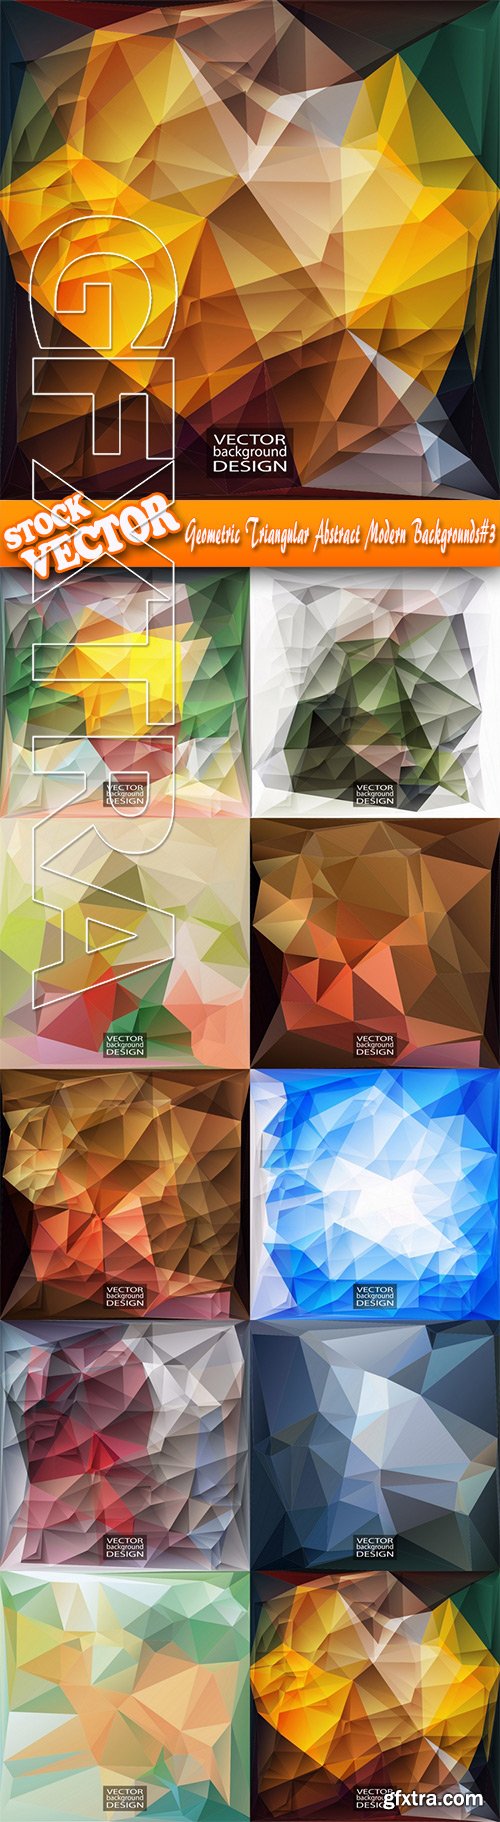 Stock Vector - Geometric Triangular Abstract Modern Backgrounds#3